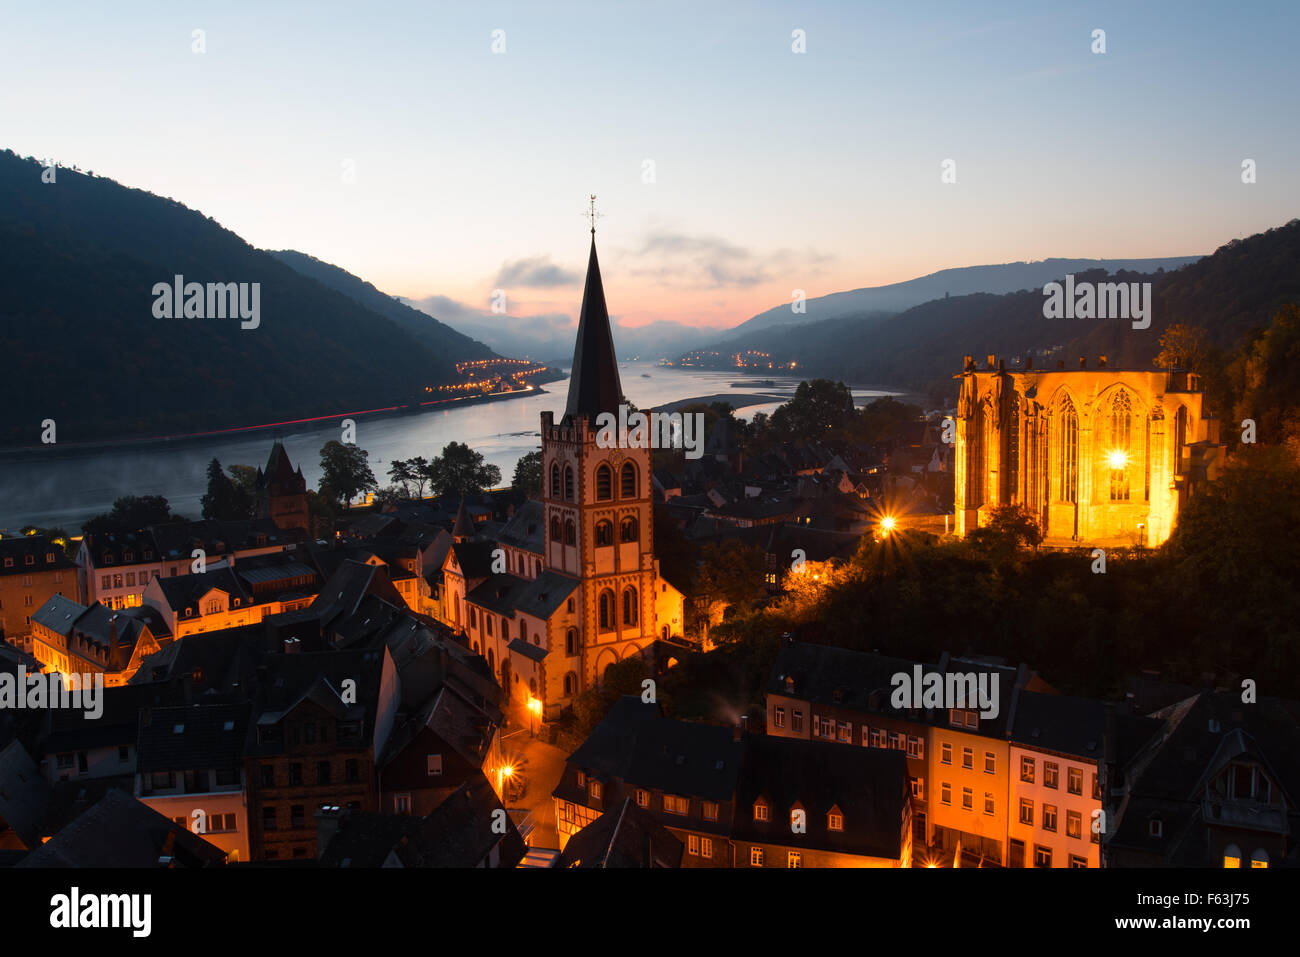 Town of Bacharach, Rhine valley, at dawn, Germany Stock Photo